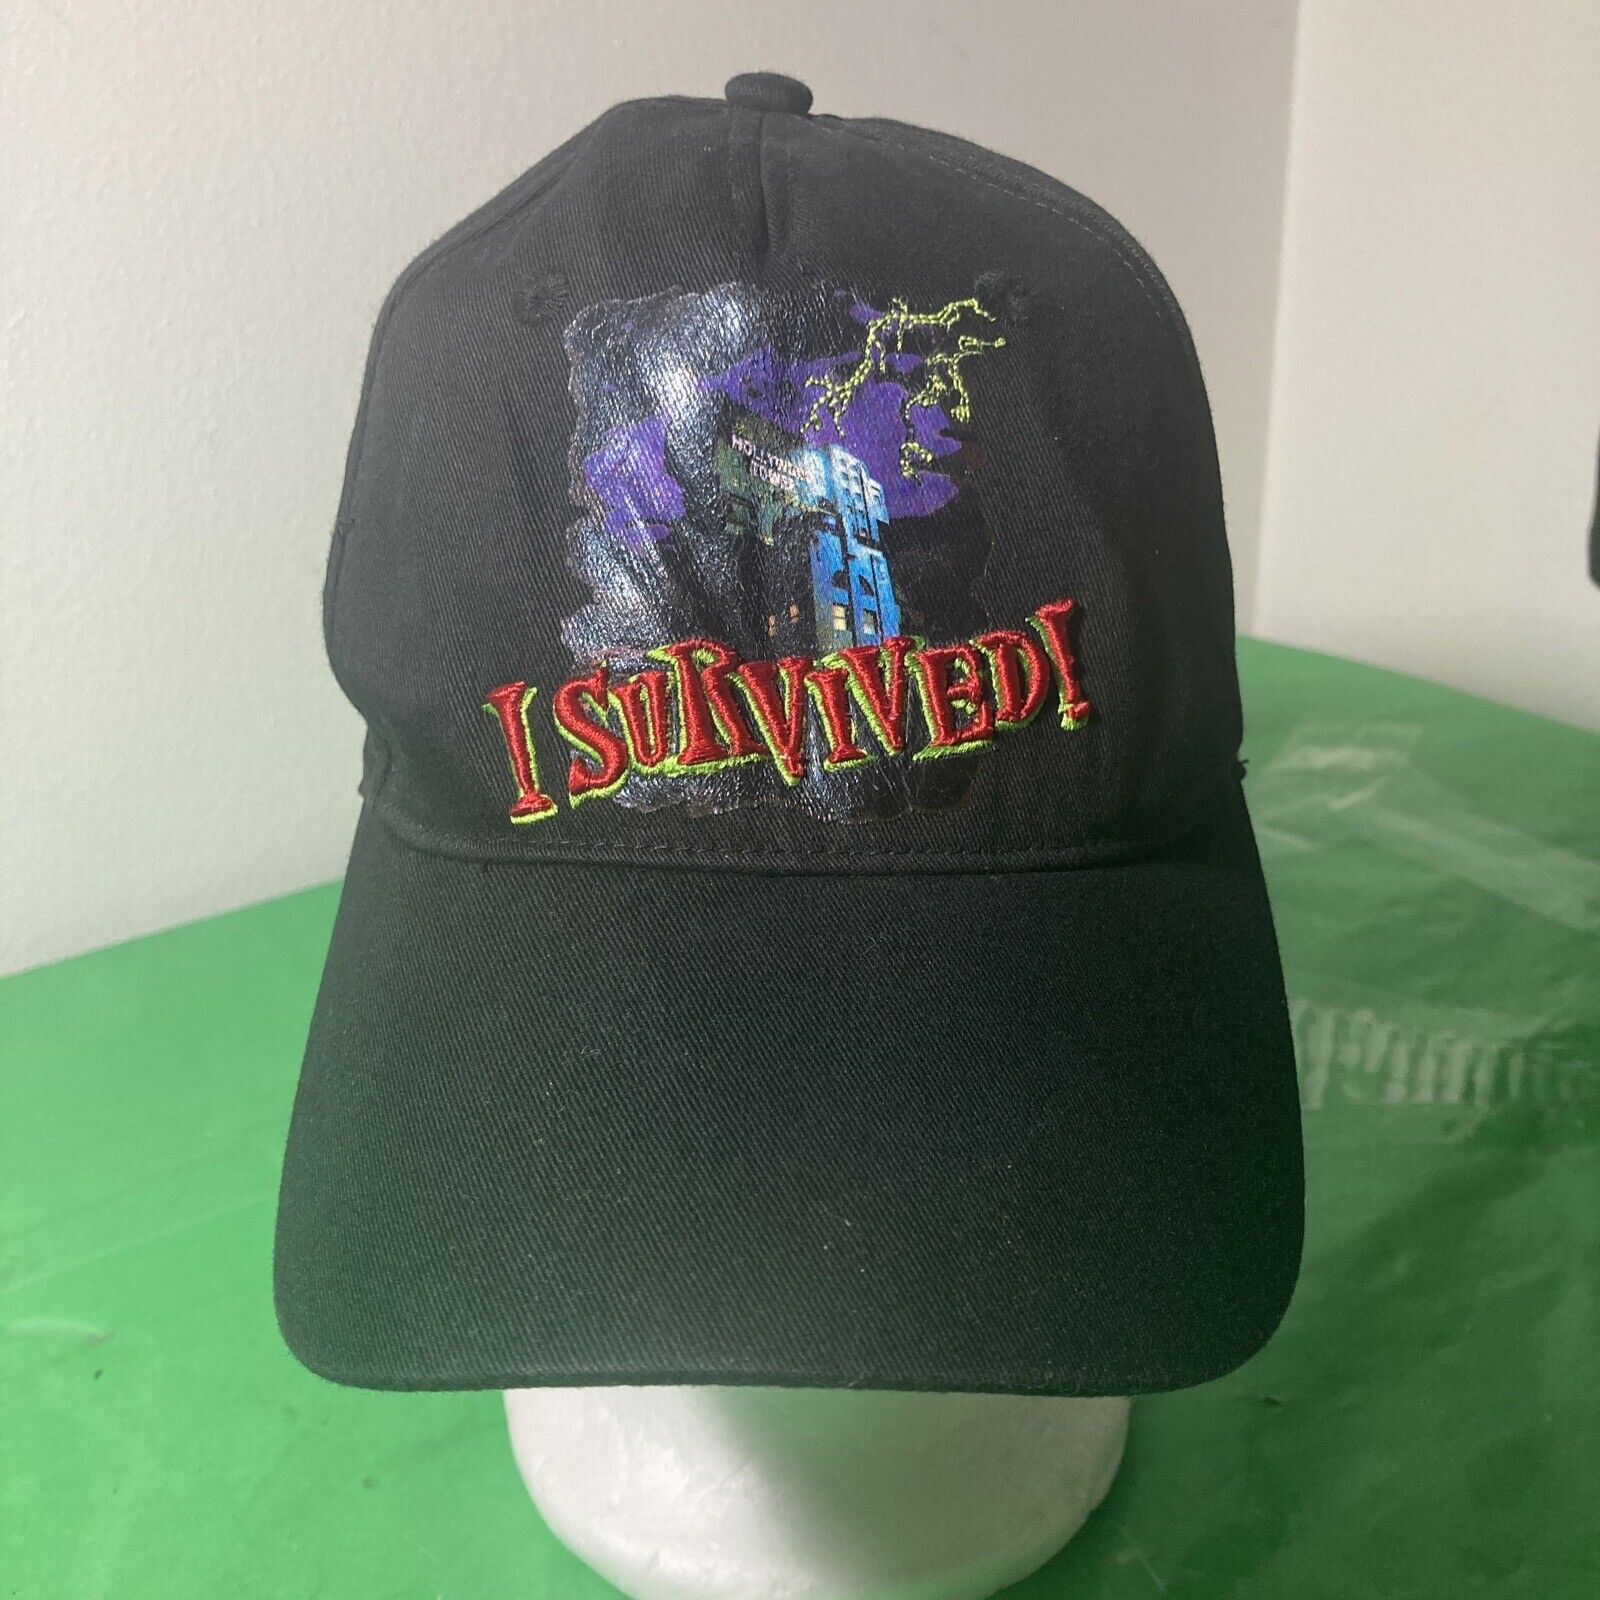 Disney The Tower Of Terror Hat 90’s Official Ride Hat Disneyland I SURVIVED RARE